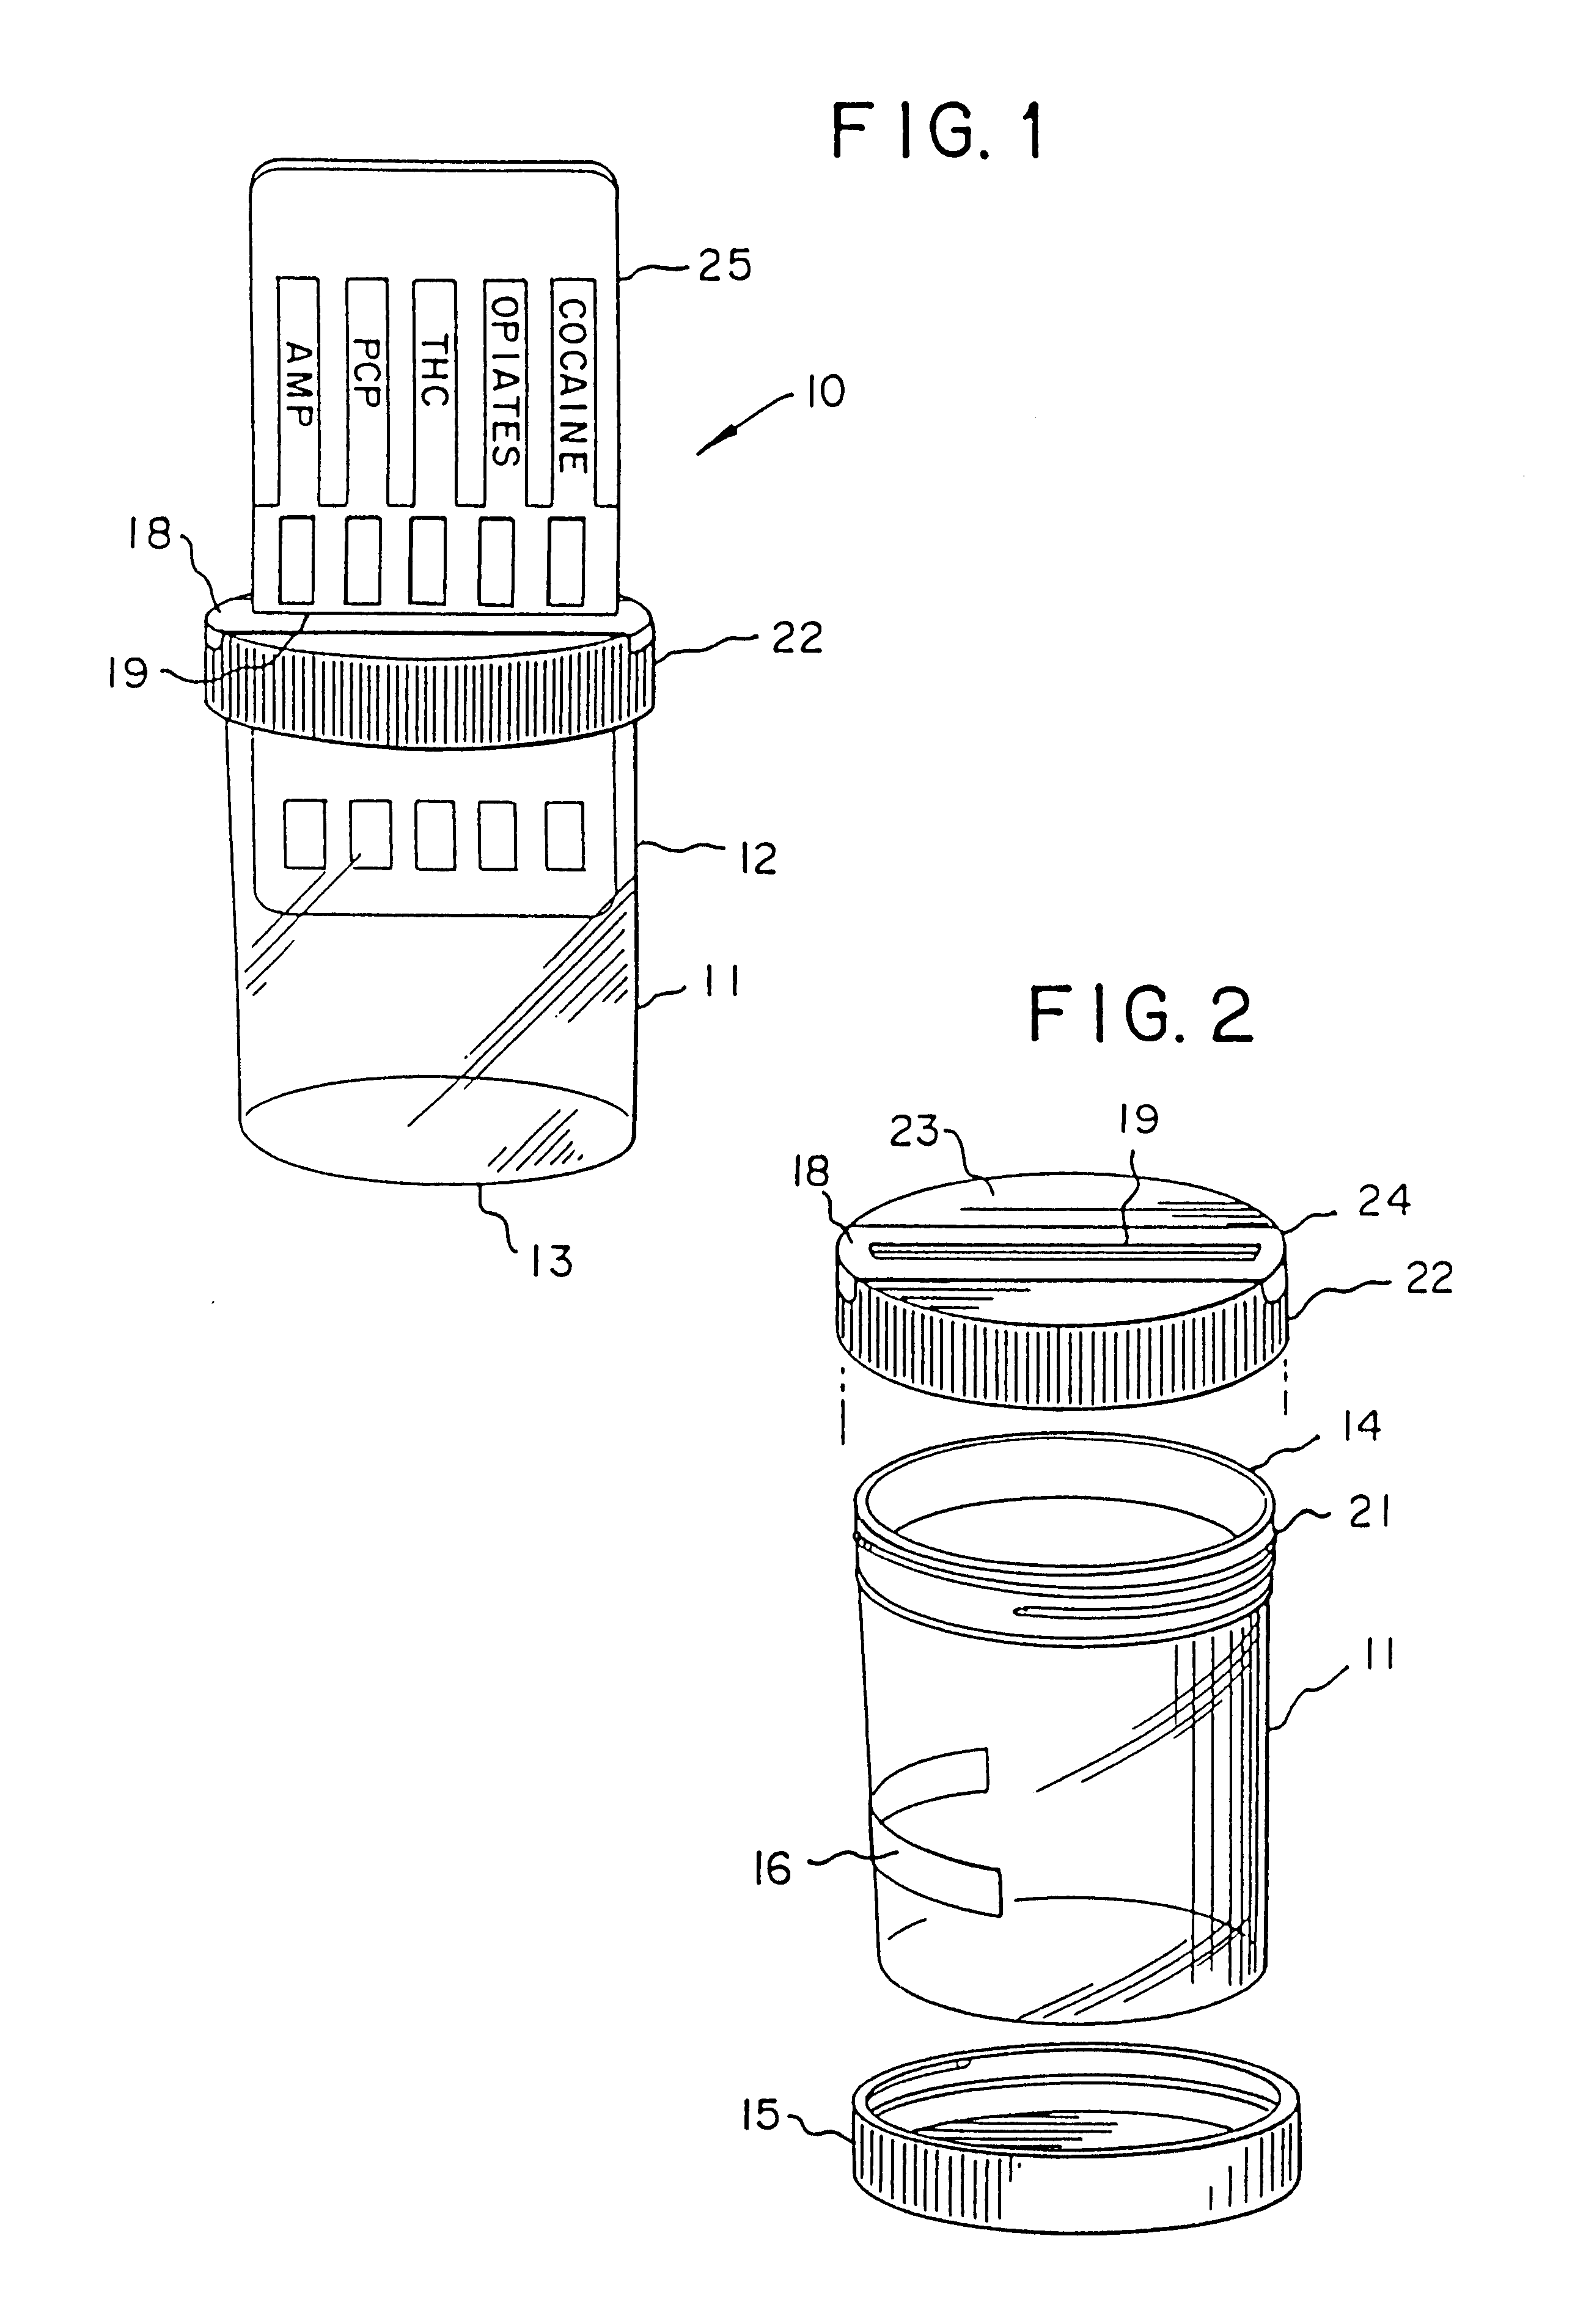 Device for the testing of body fluid samples